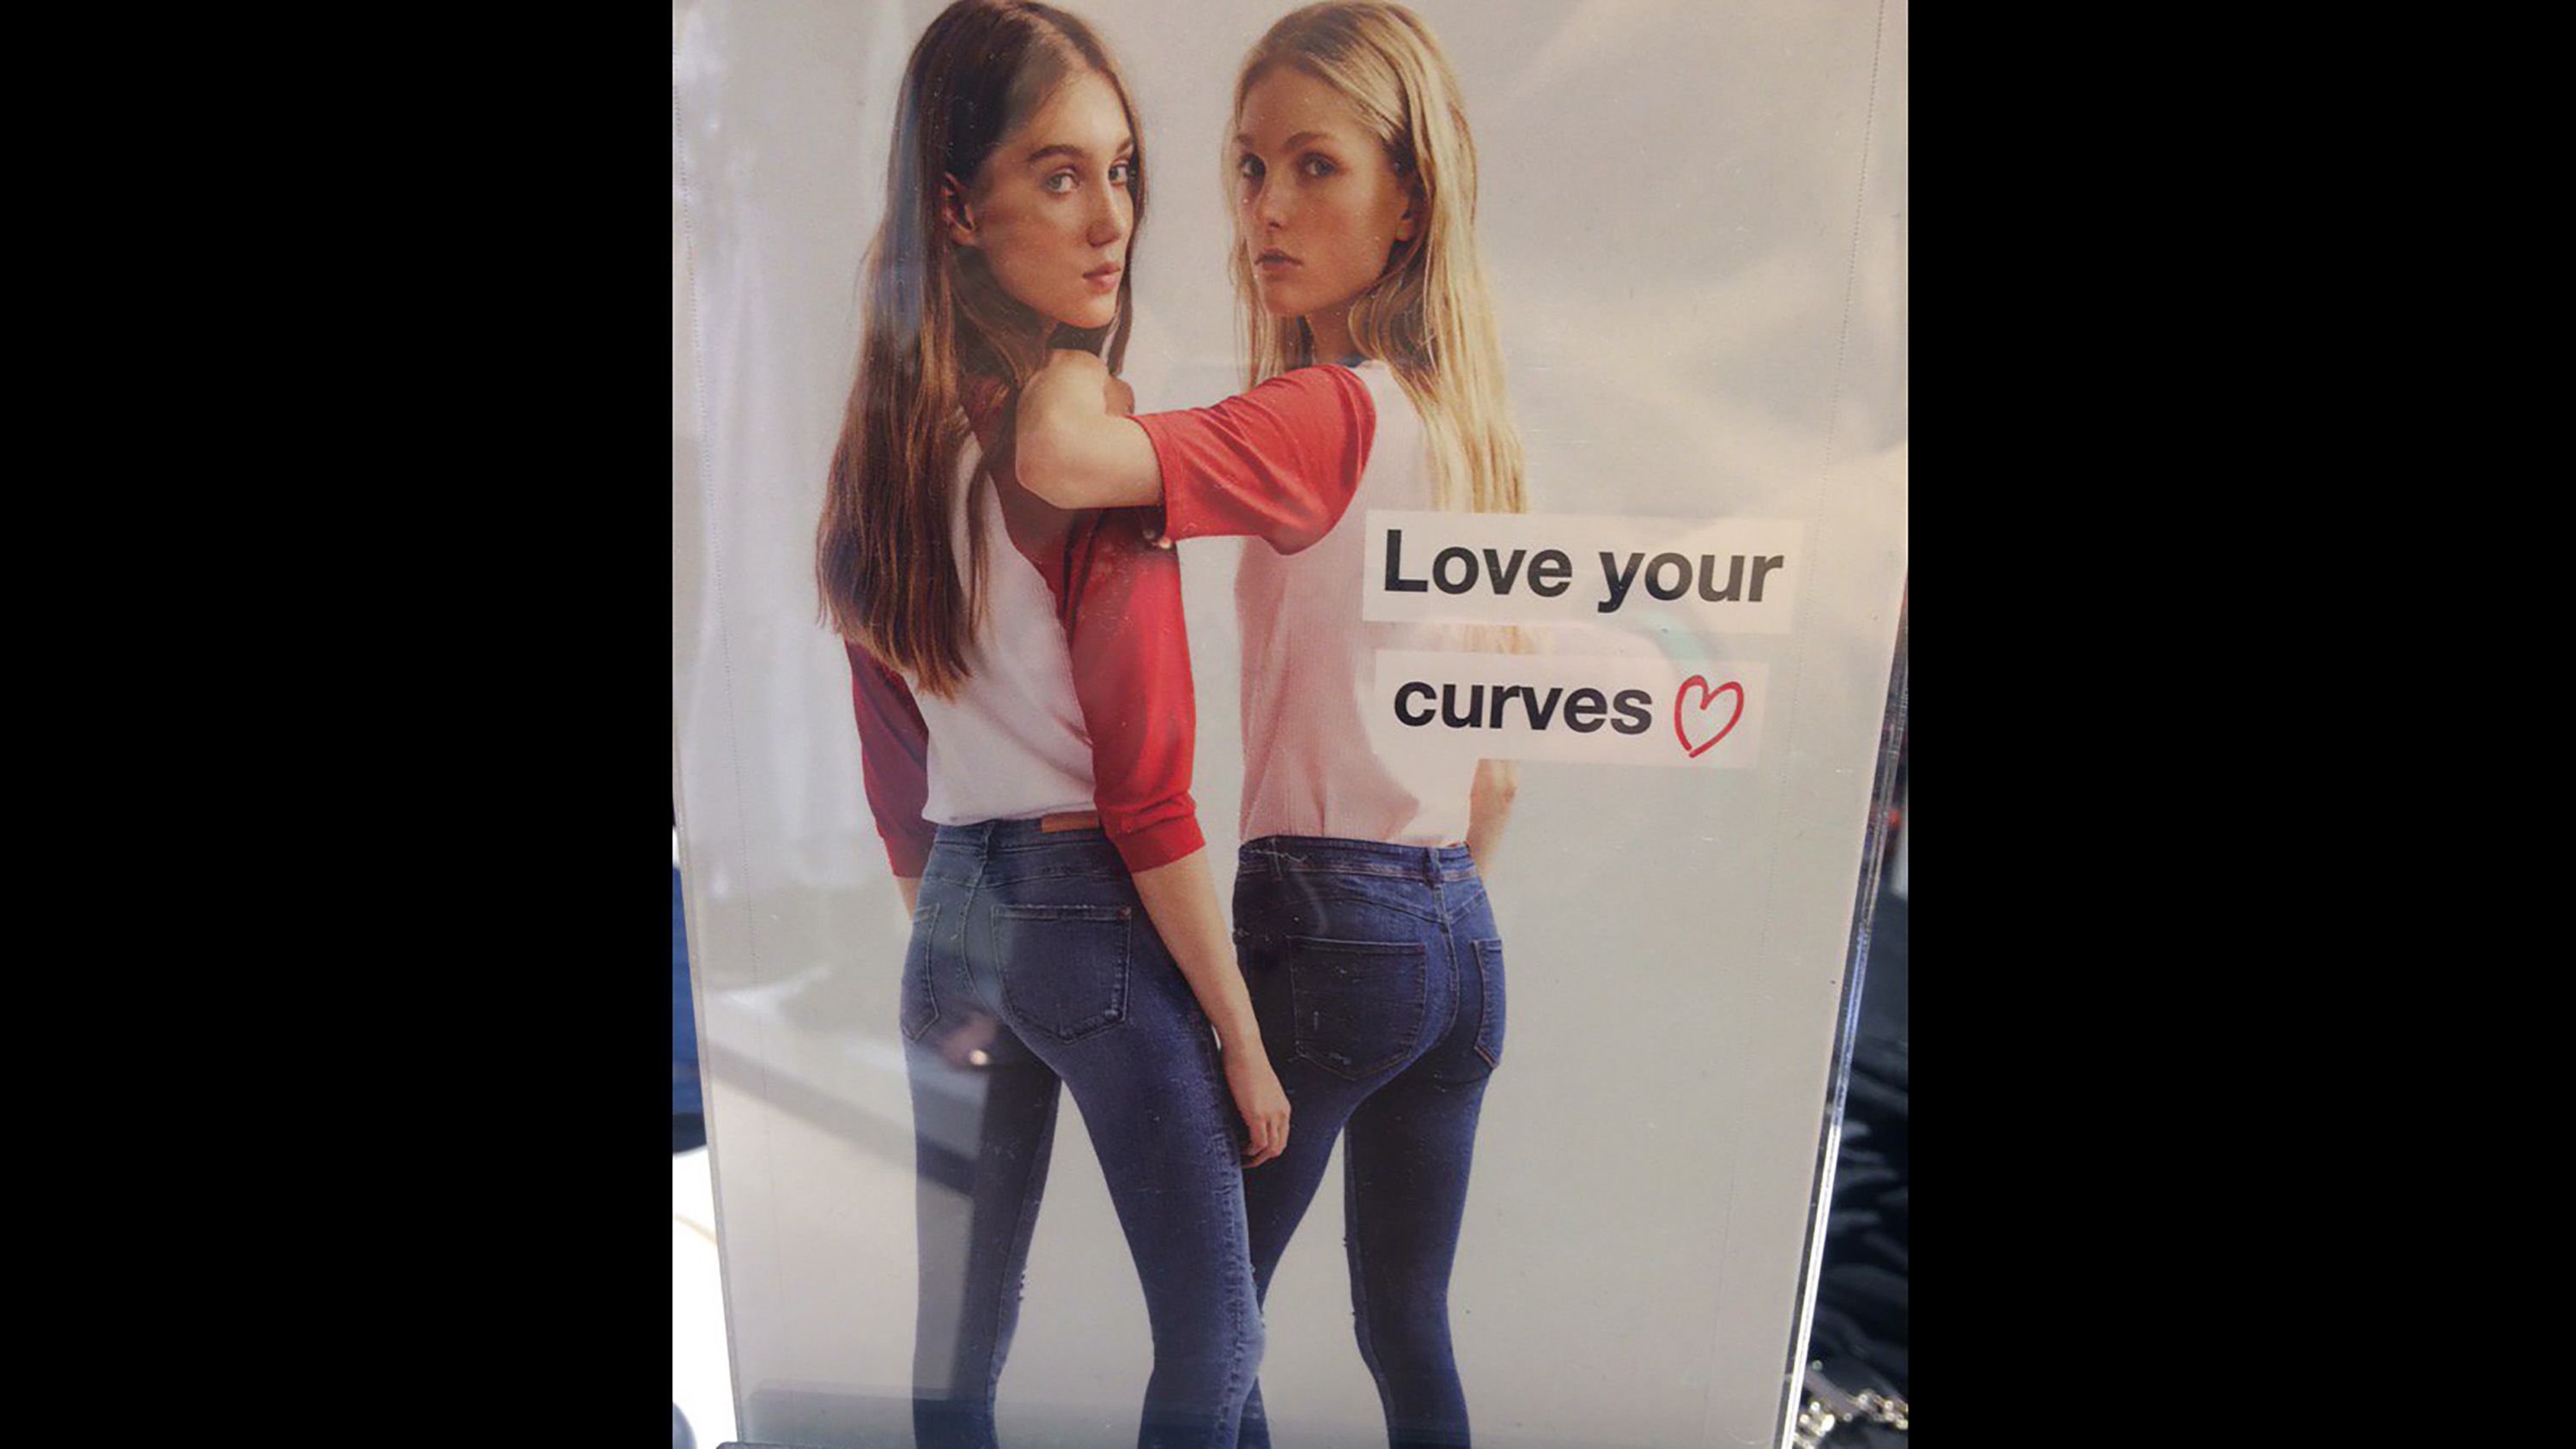 Zara criticized for skinny models in 'curves' campaign